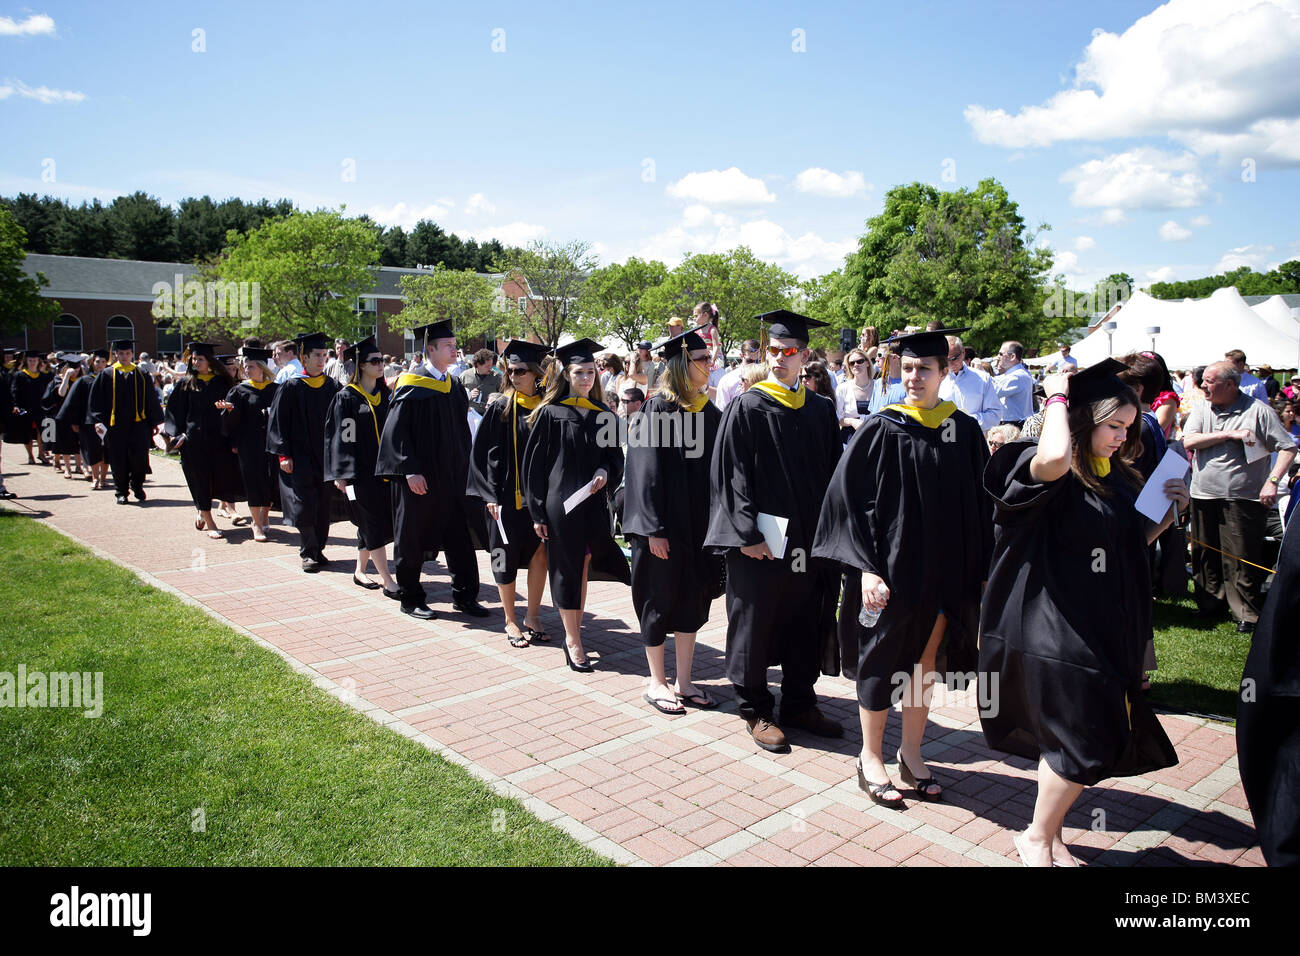 Students proceed into the commencement ceremony at Quinnipiac University in Hamden CT USA Stock Photo